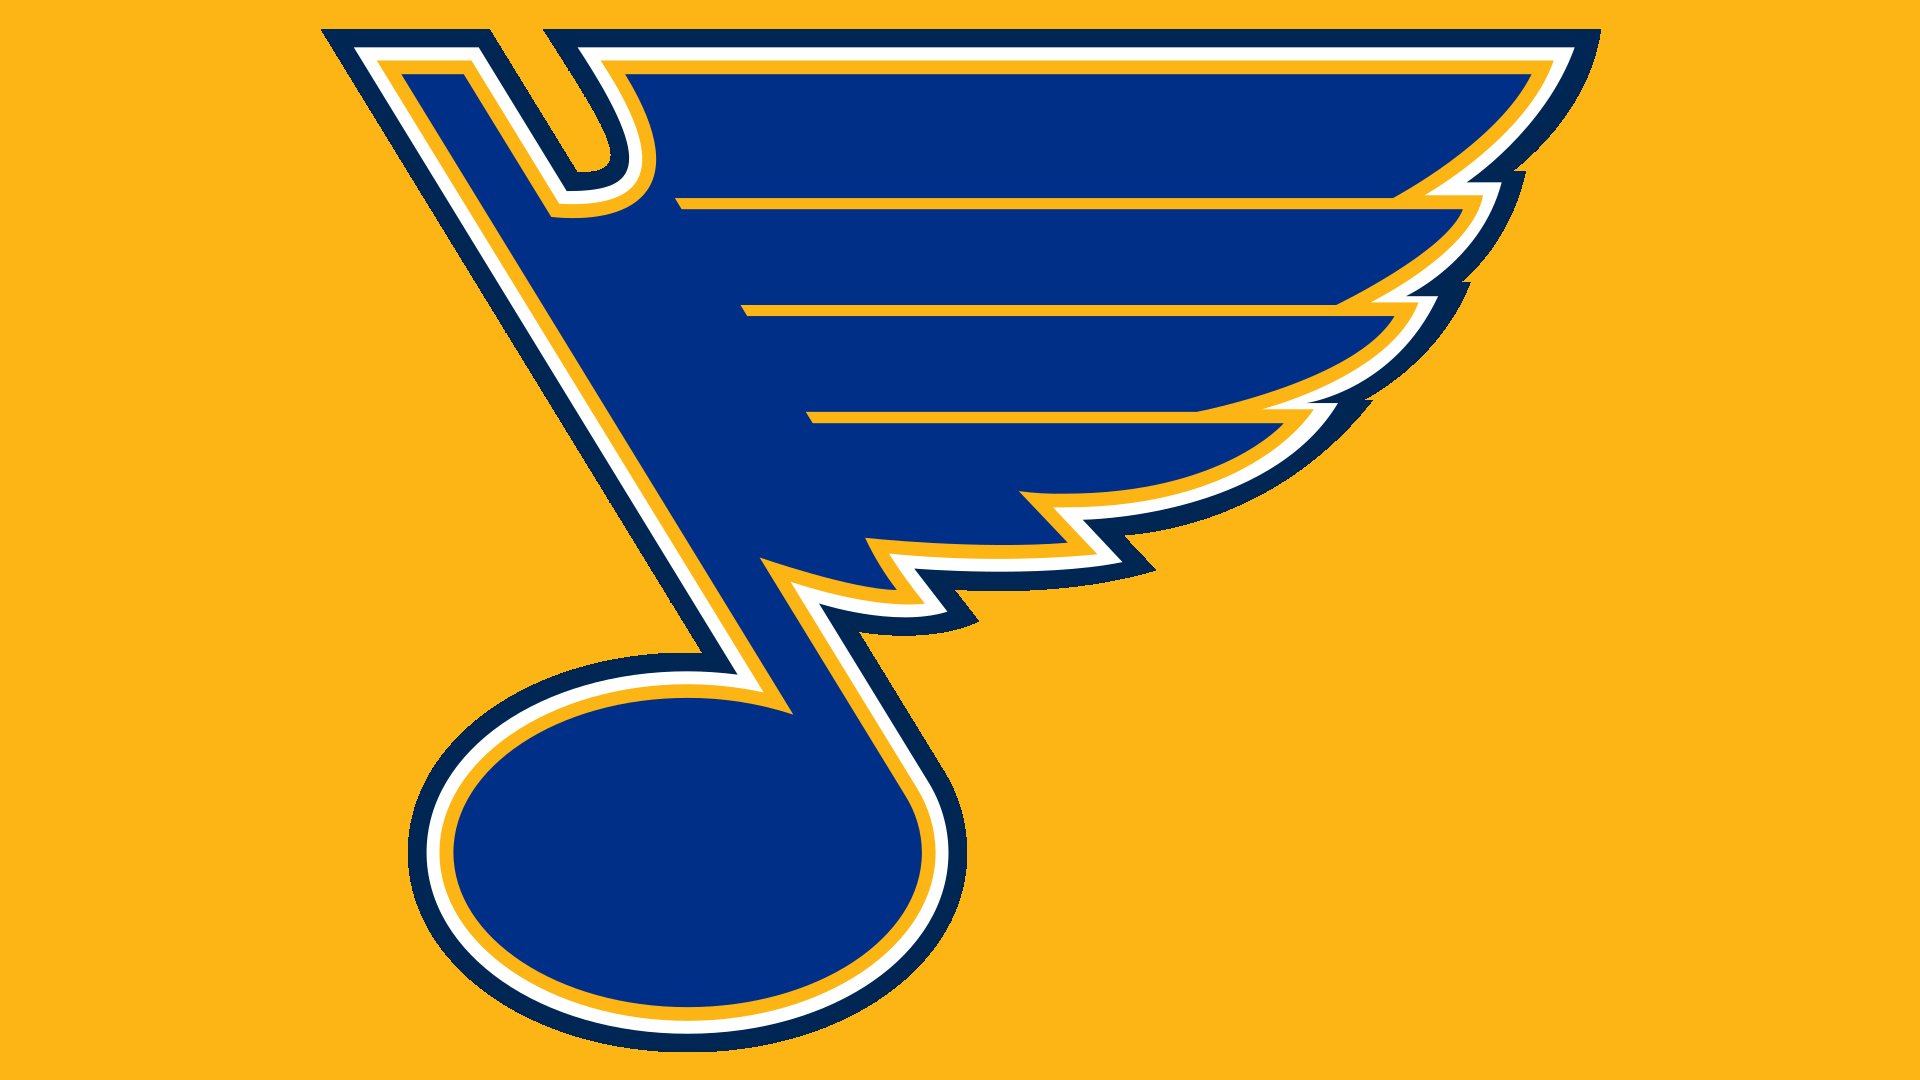 St. Louis Blues logo and symbol, meaning, history, PNG